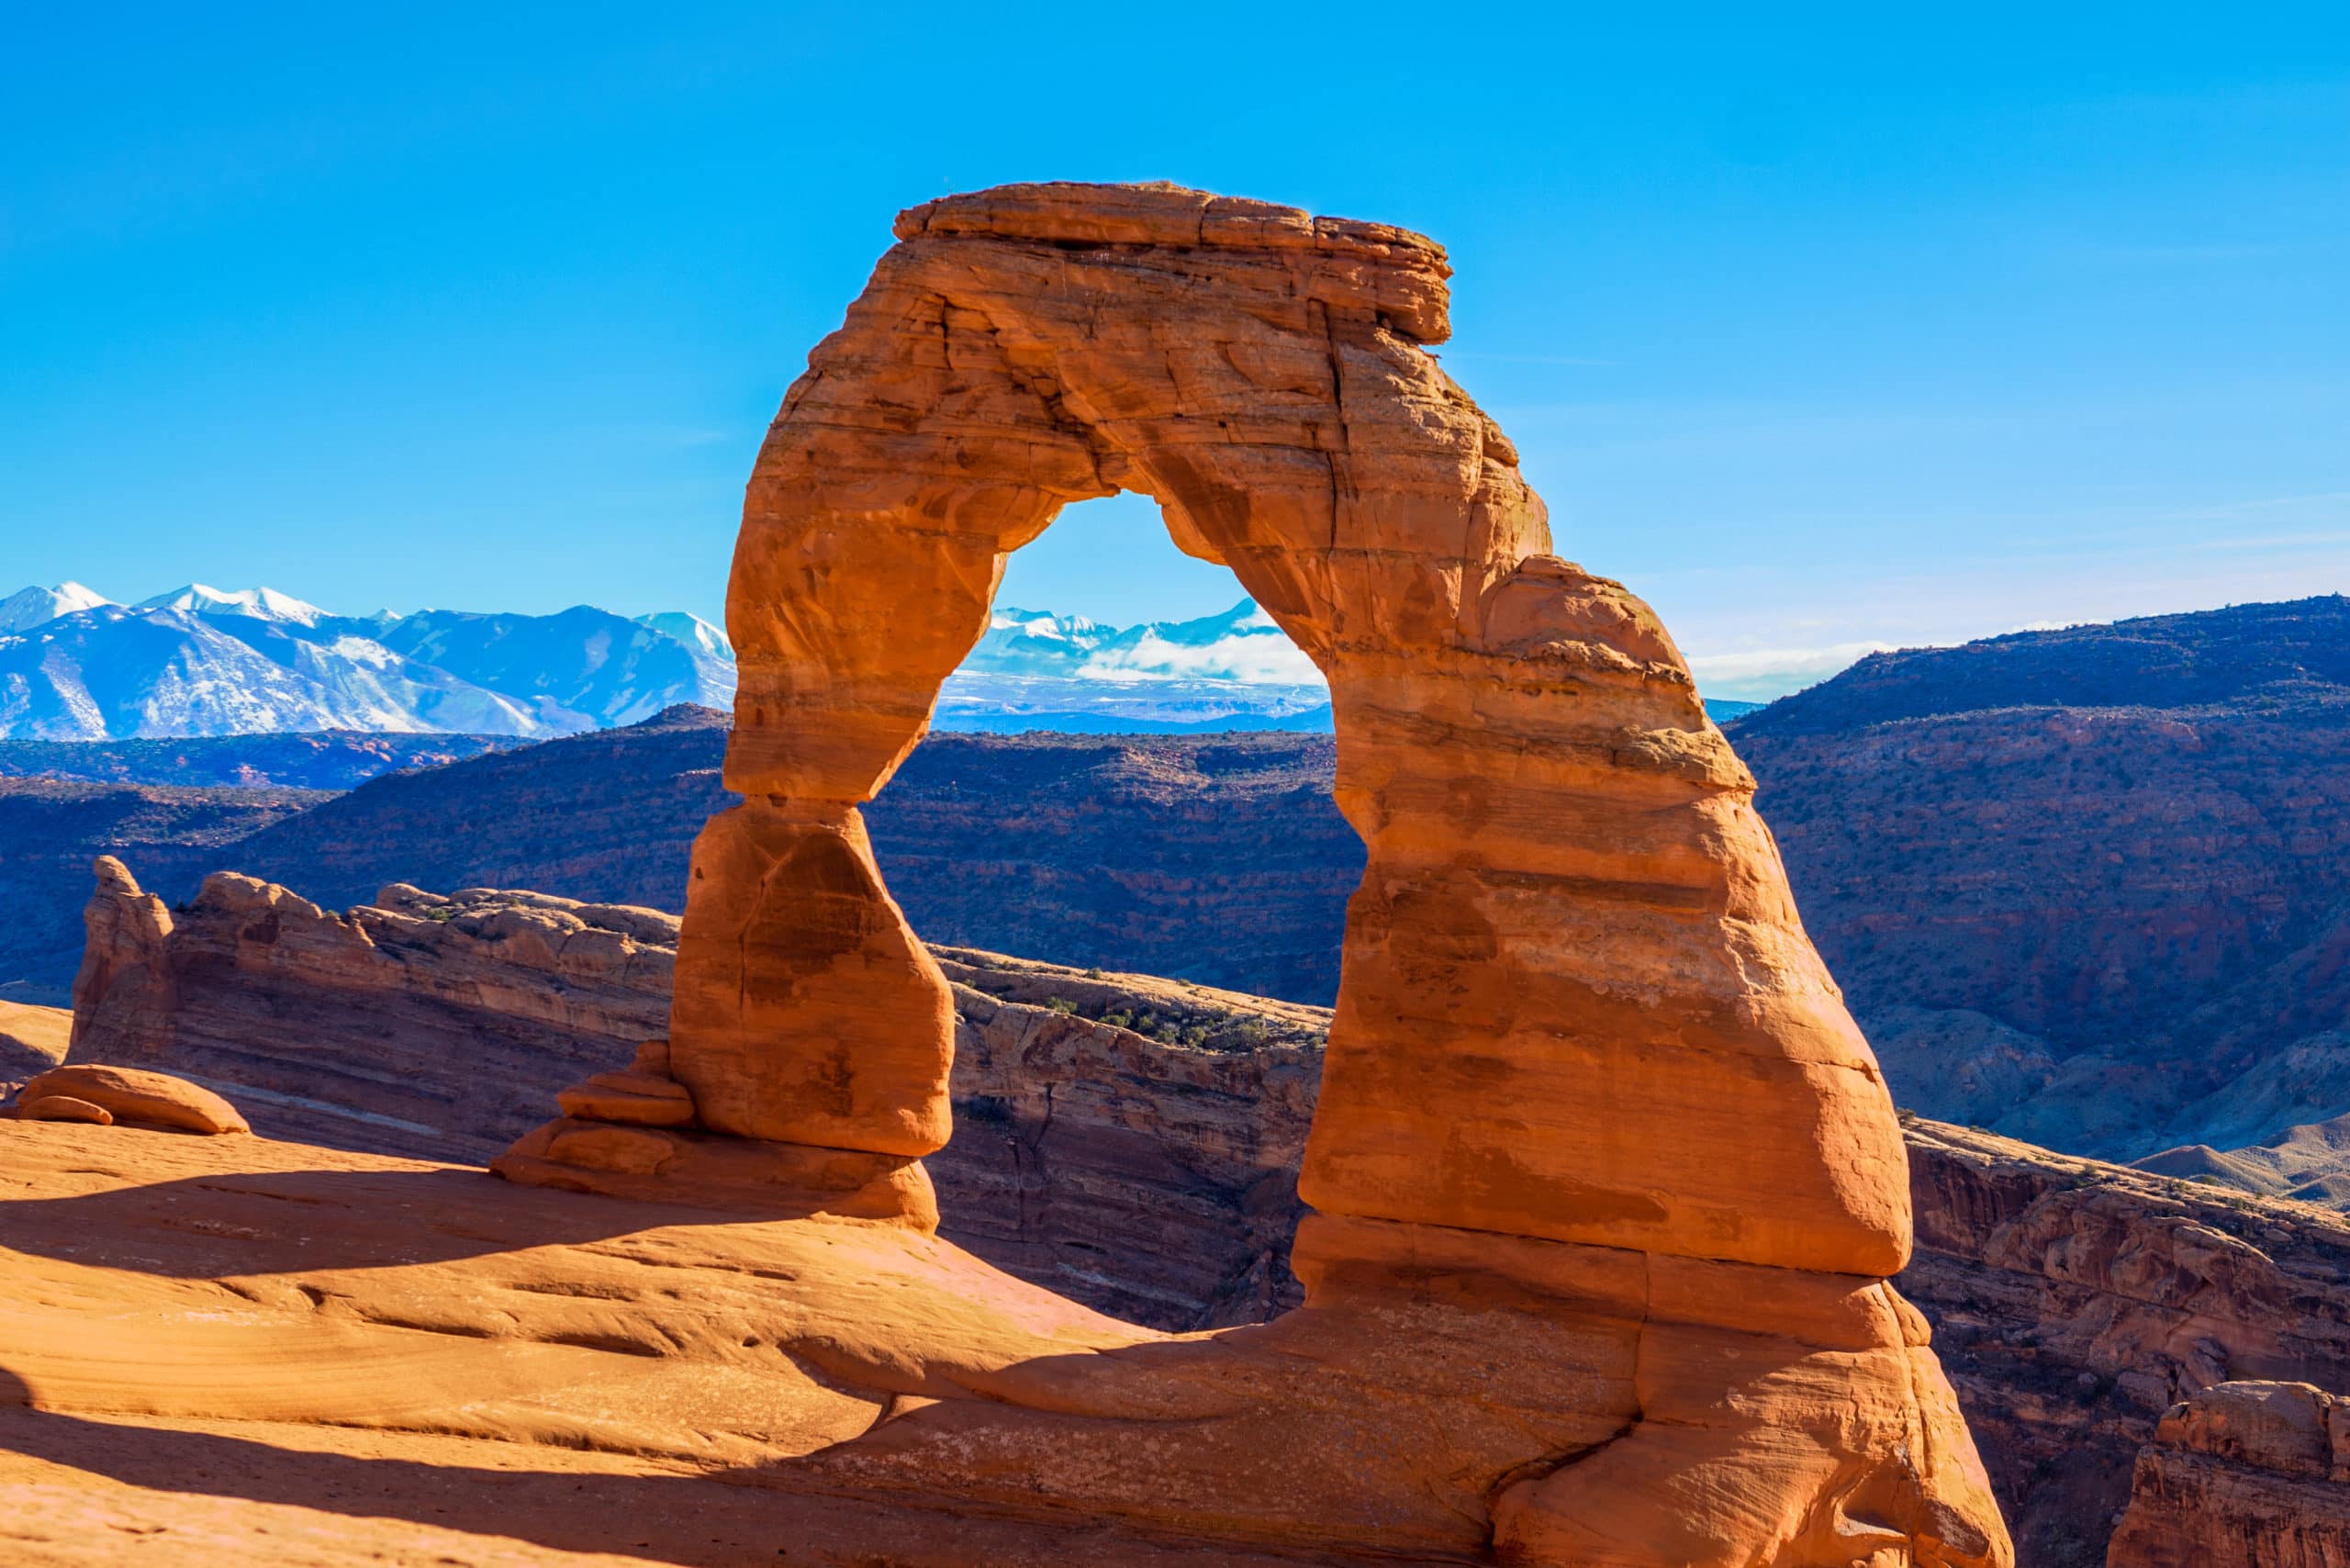 Beautiful Image taken at Arches National Park in Utah scaled from Tumbleweed Travel